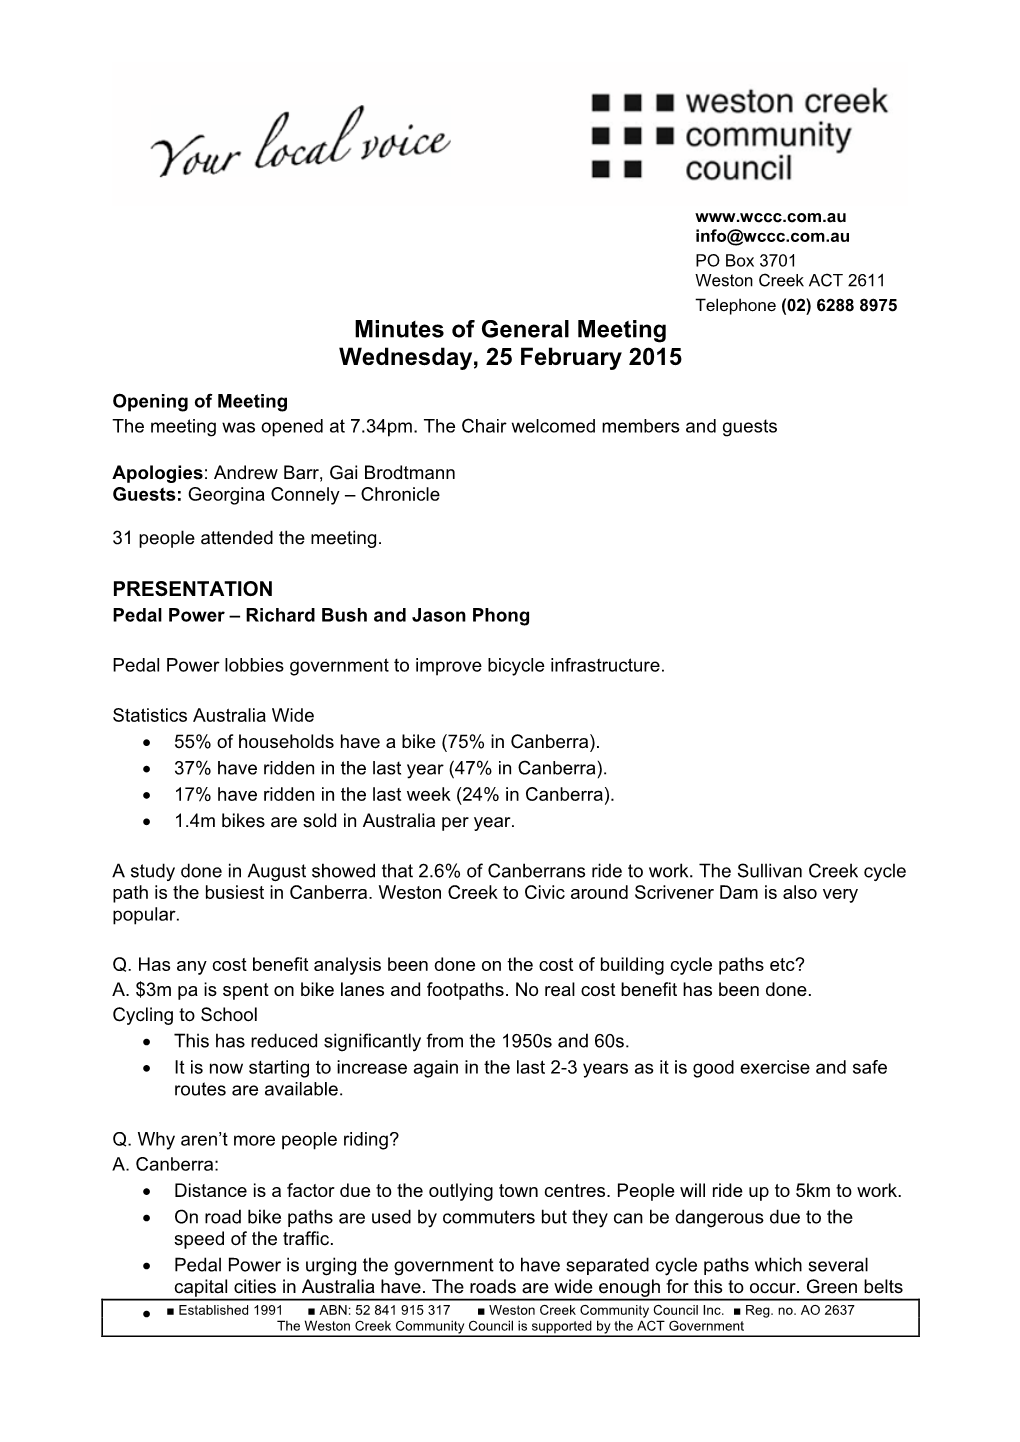 Minutes of General Meeting Wednesday, 25 February 2015